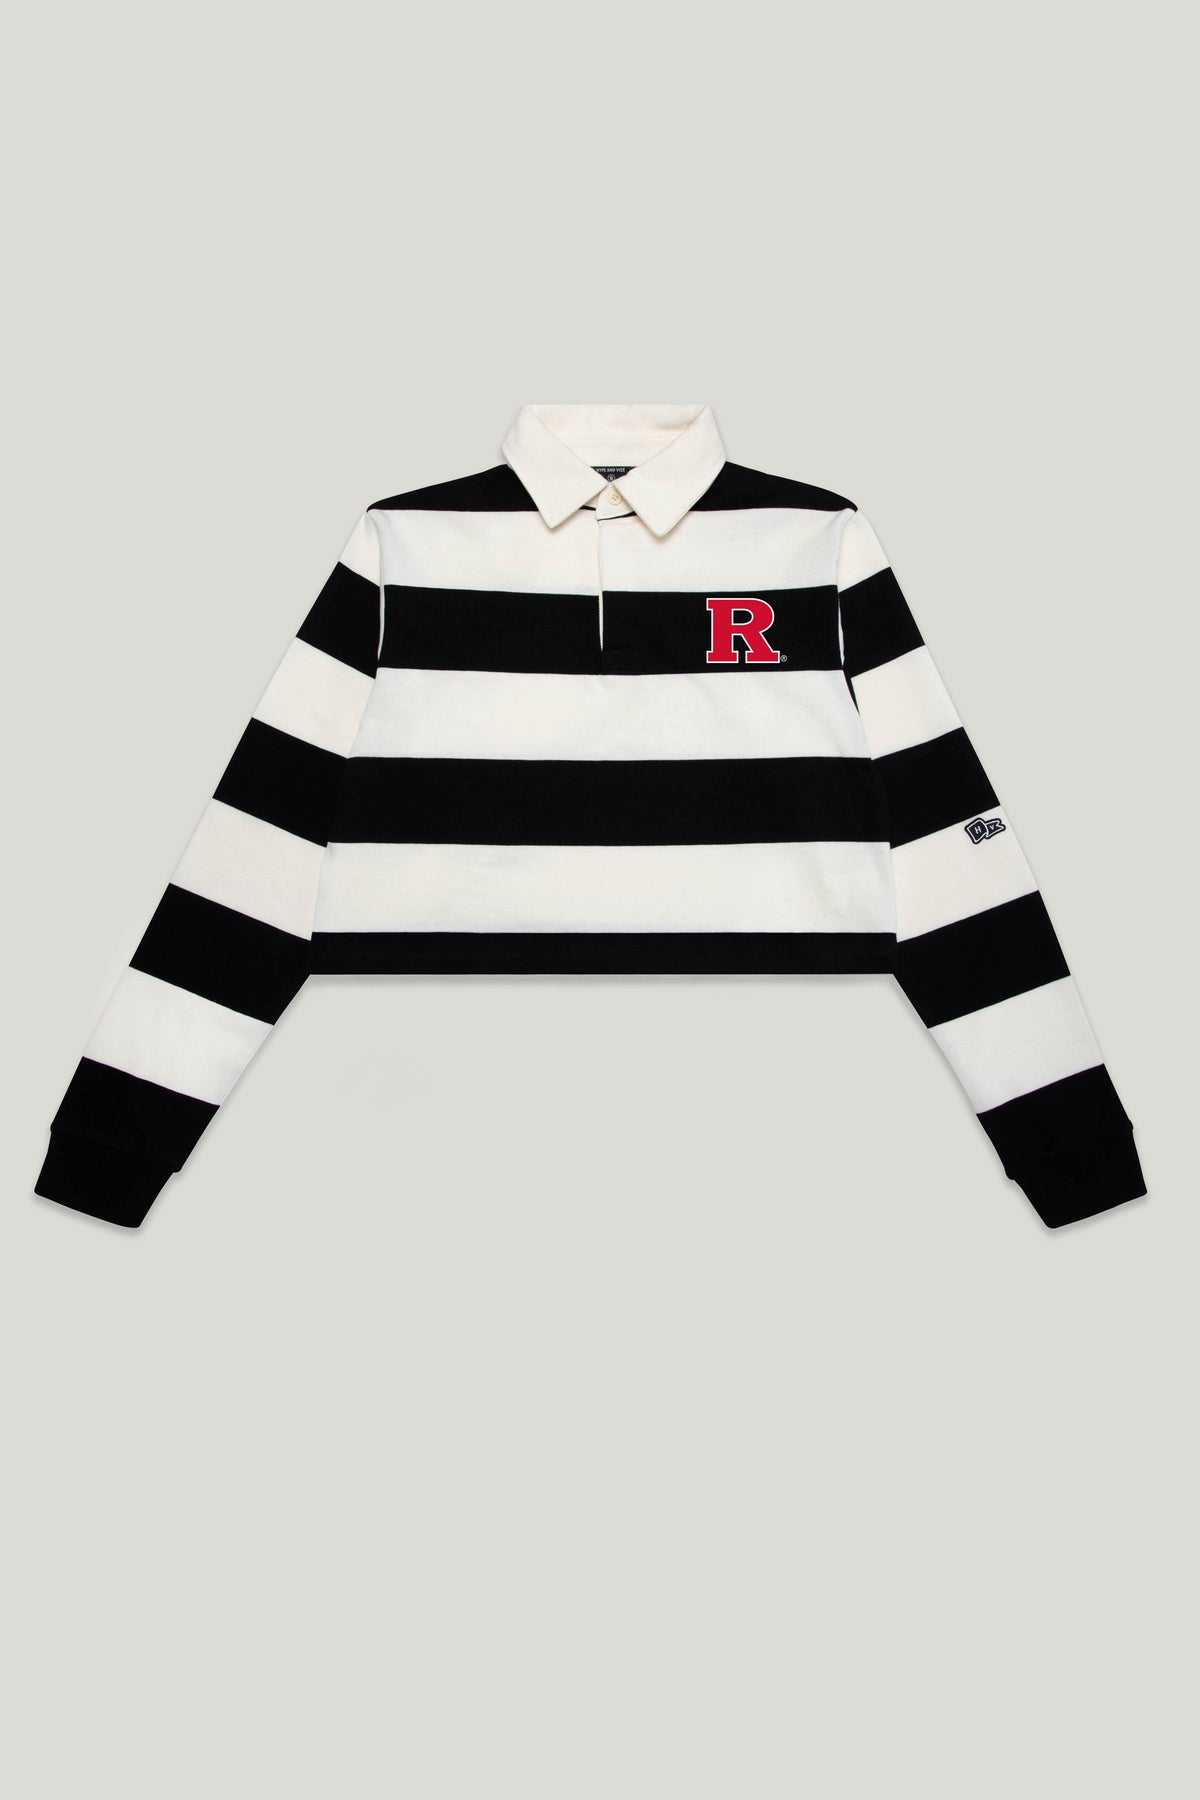 Rutgers Rugby Top